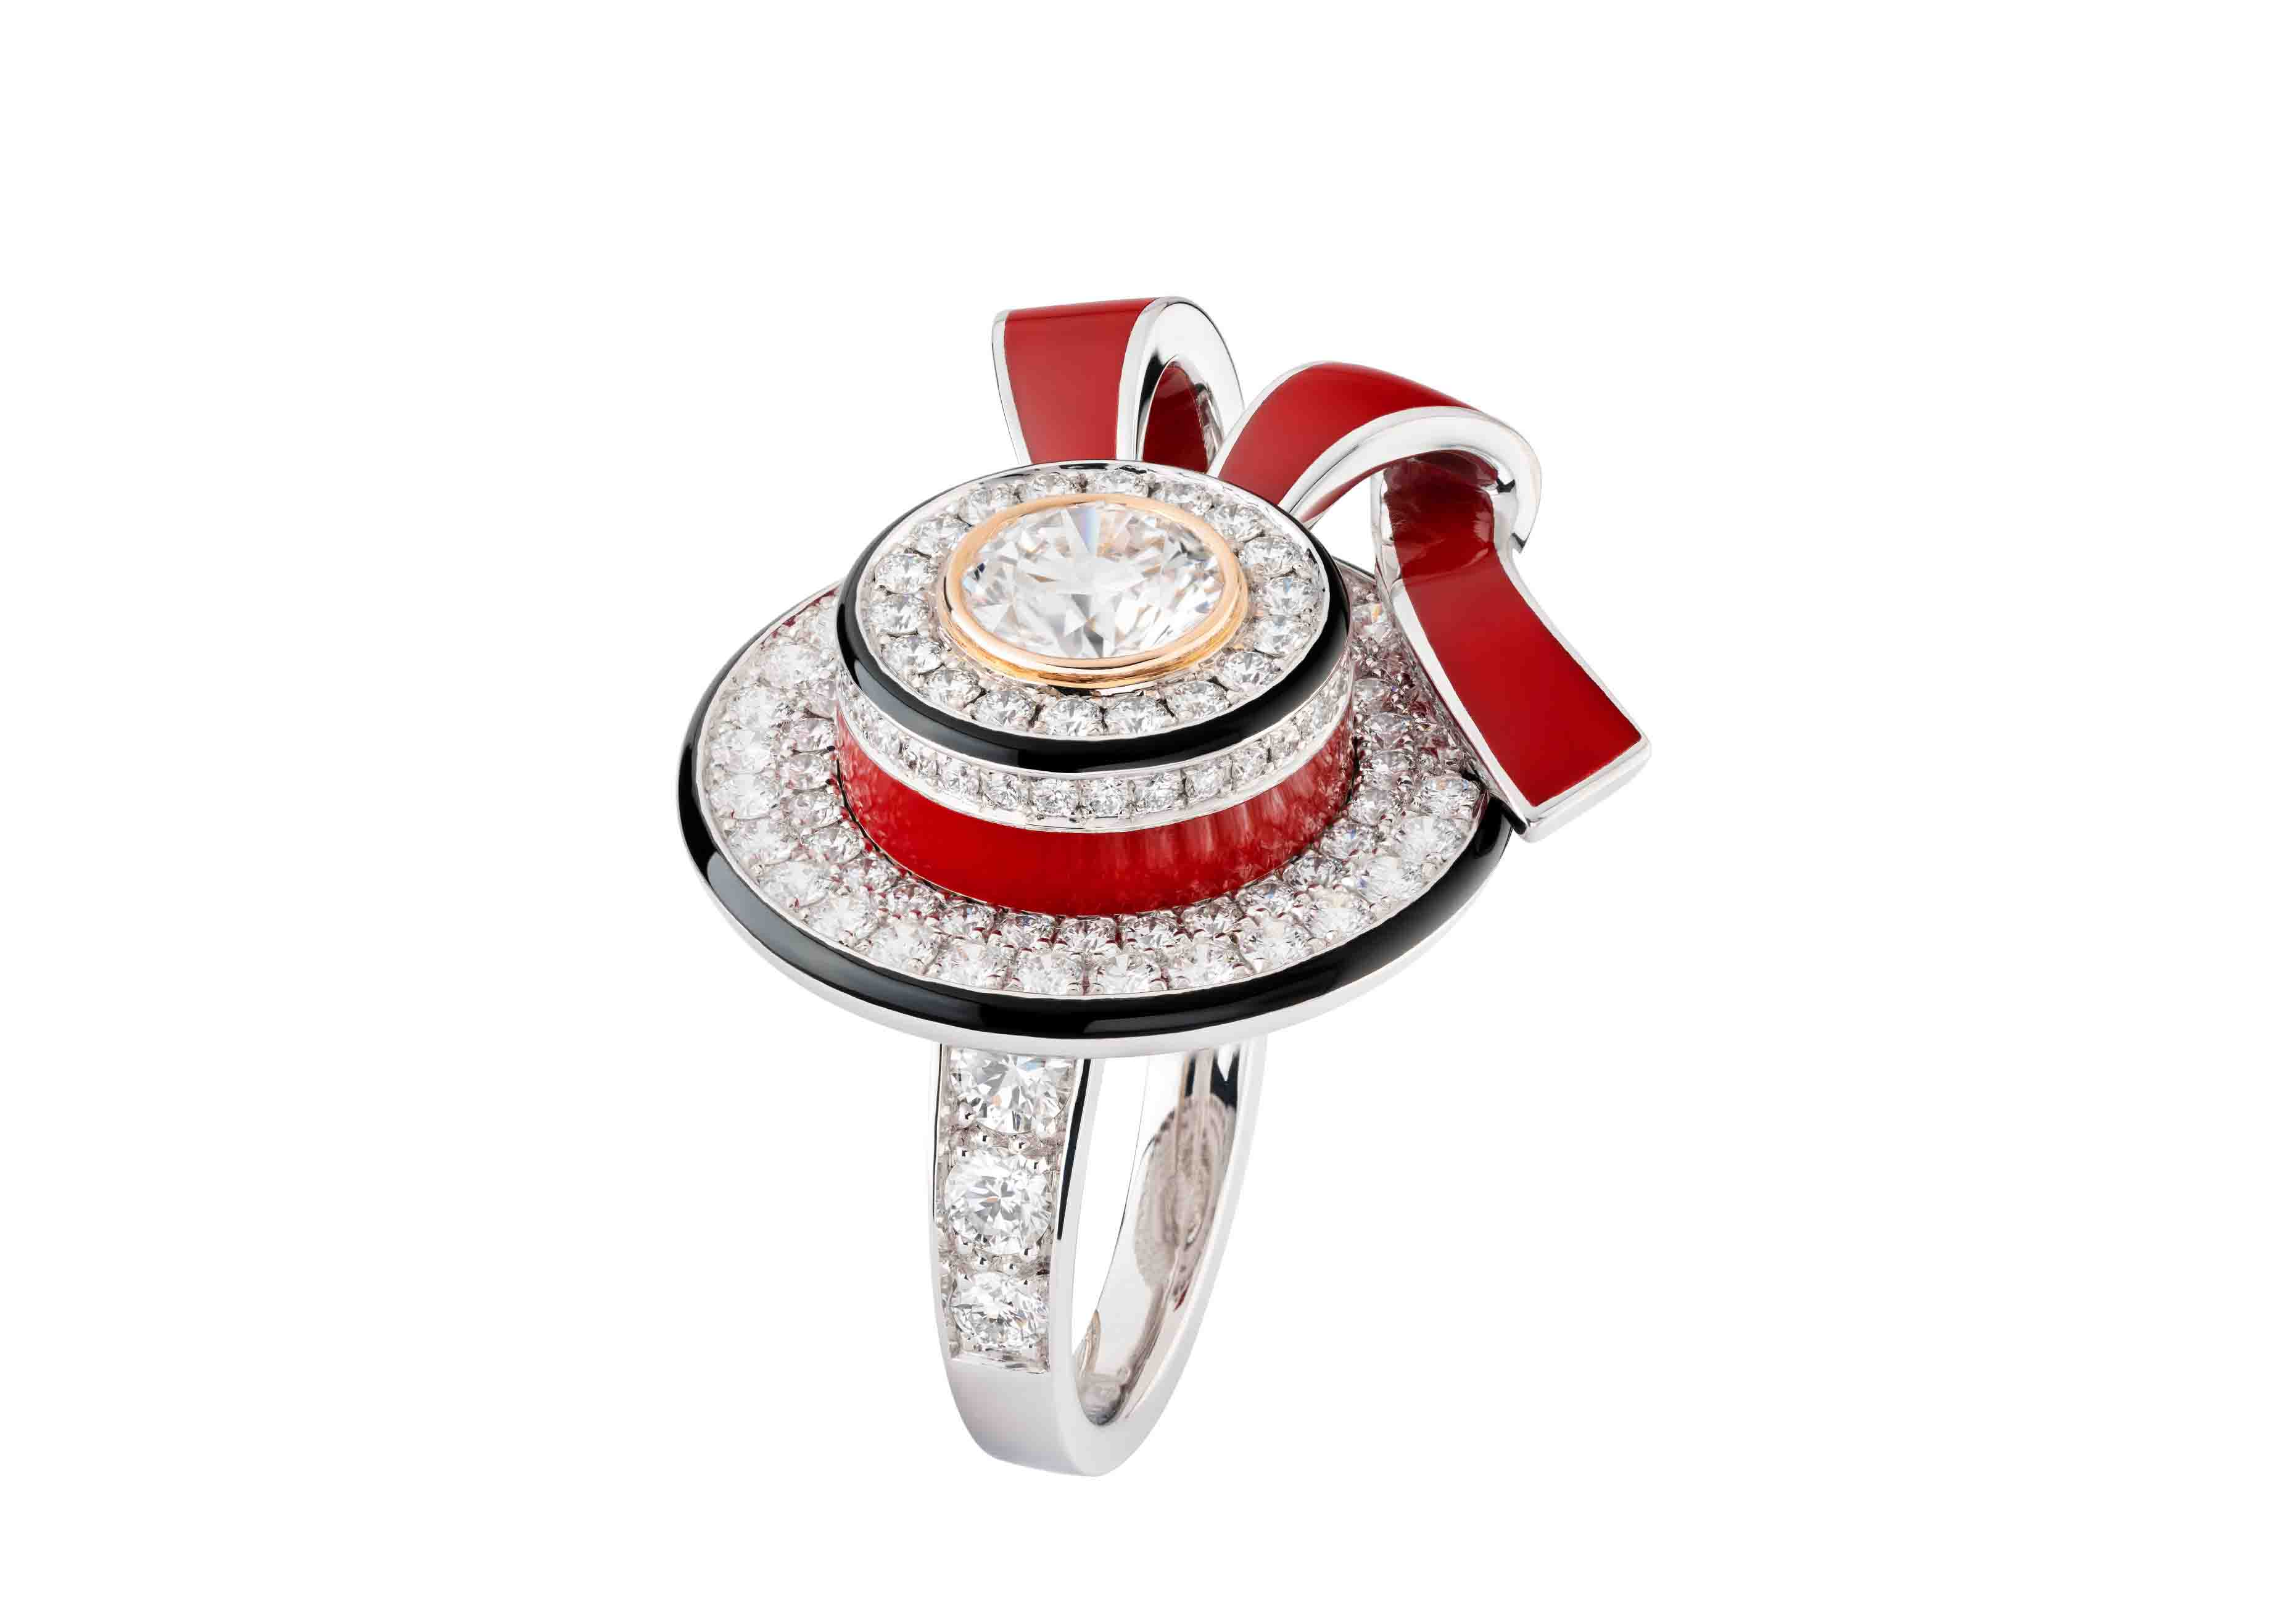 The Mythical Story Behind Chanel N5 High Jewellery Collection